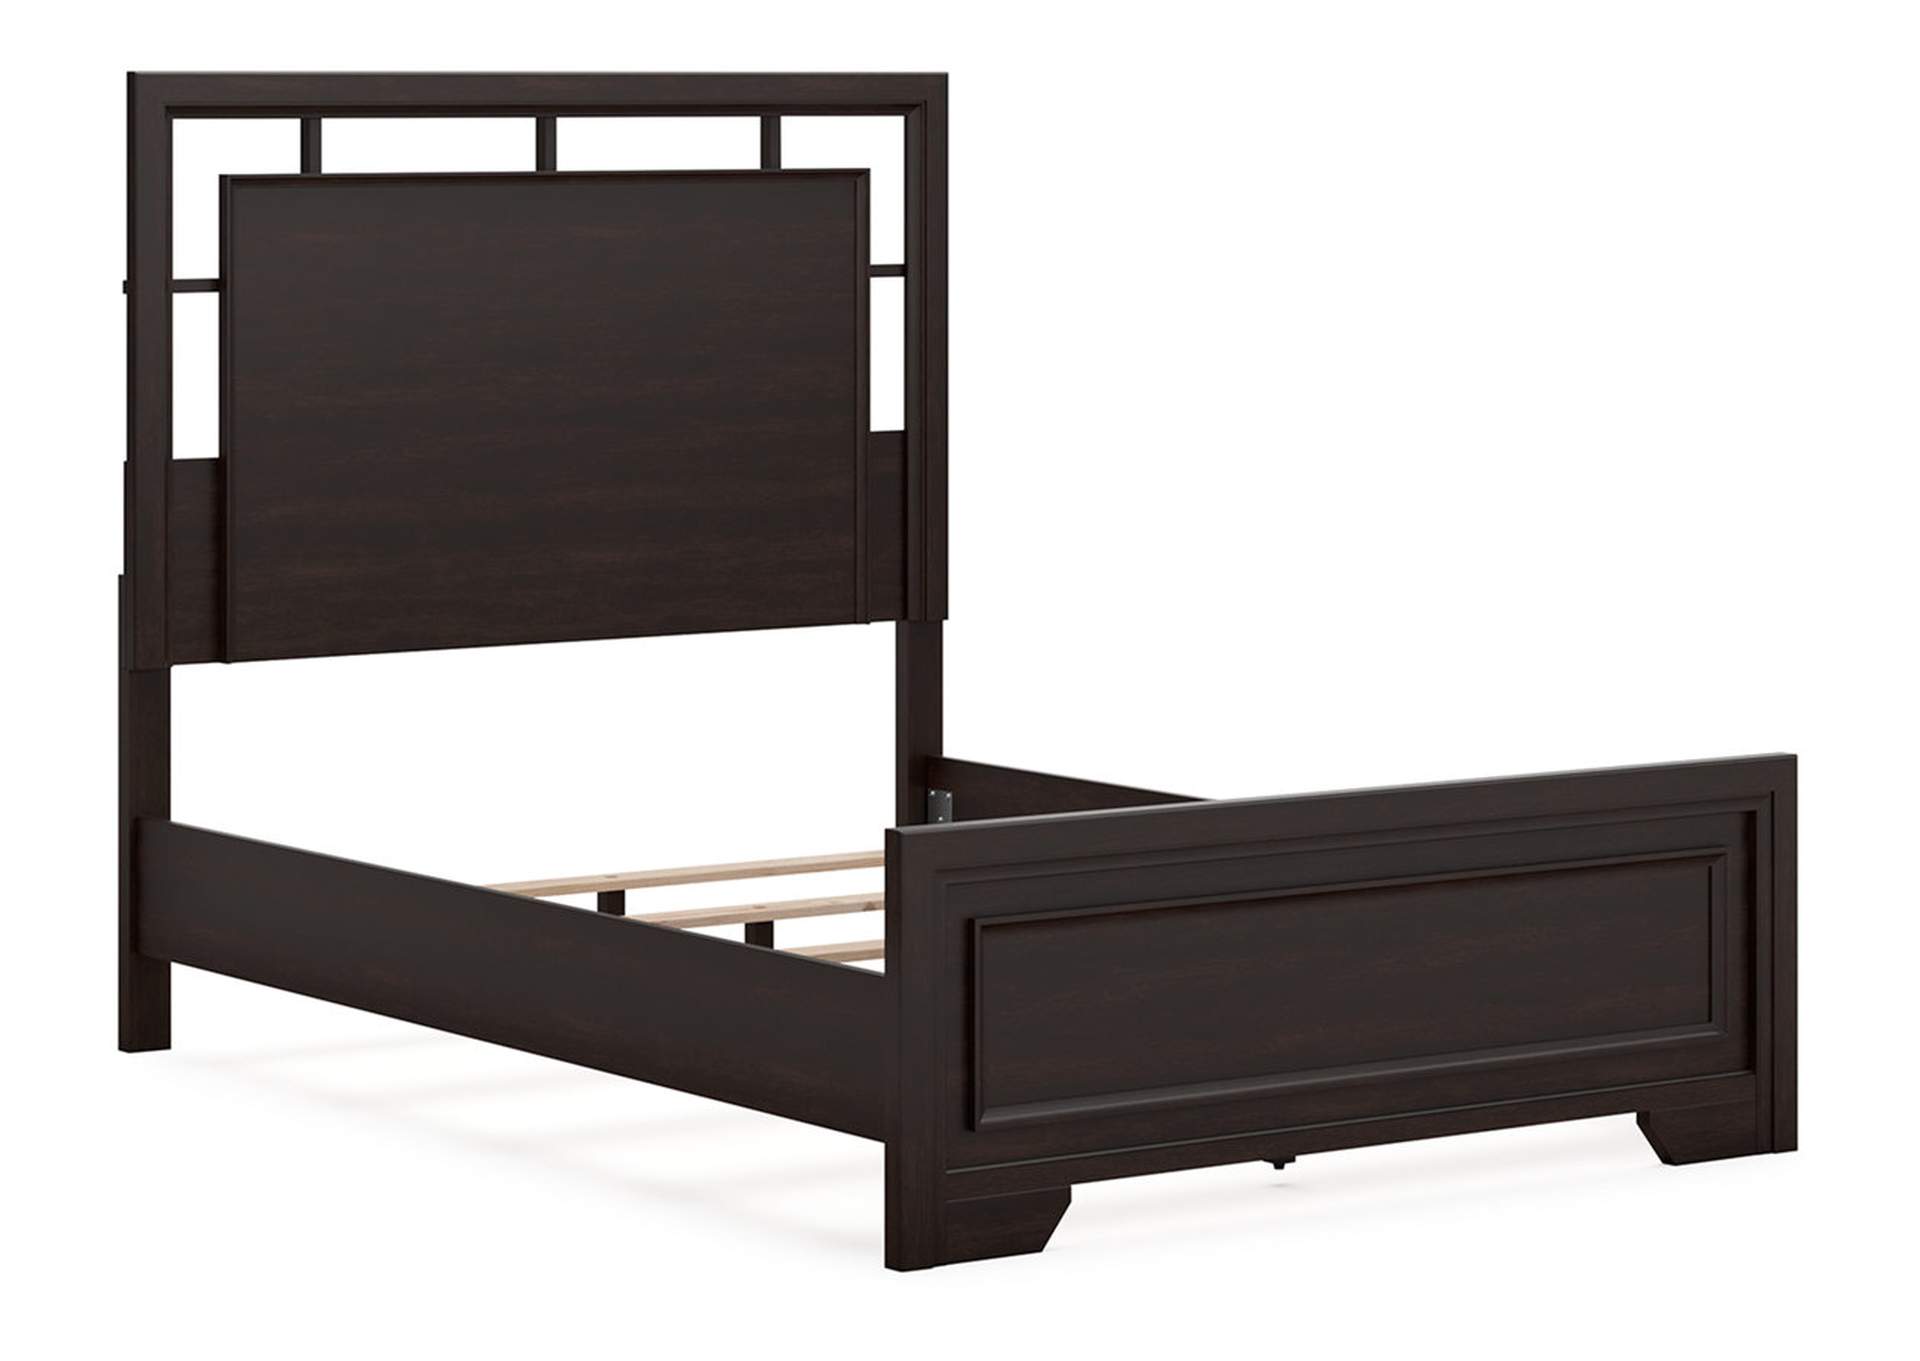 Covetown Full Panel Bed,Signature Design By Ashley